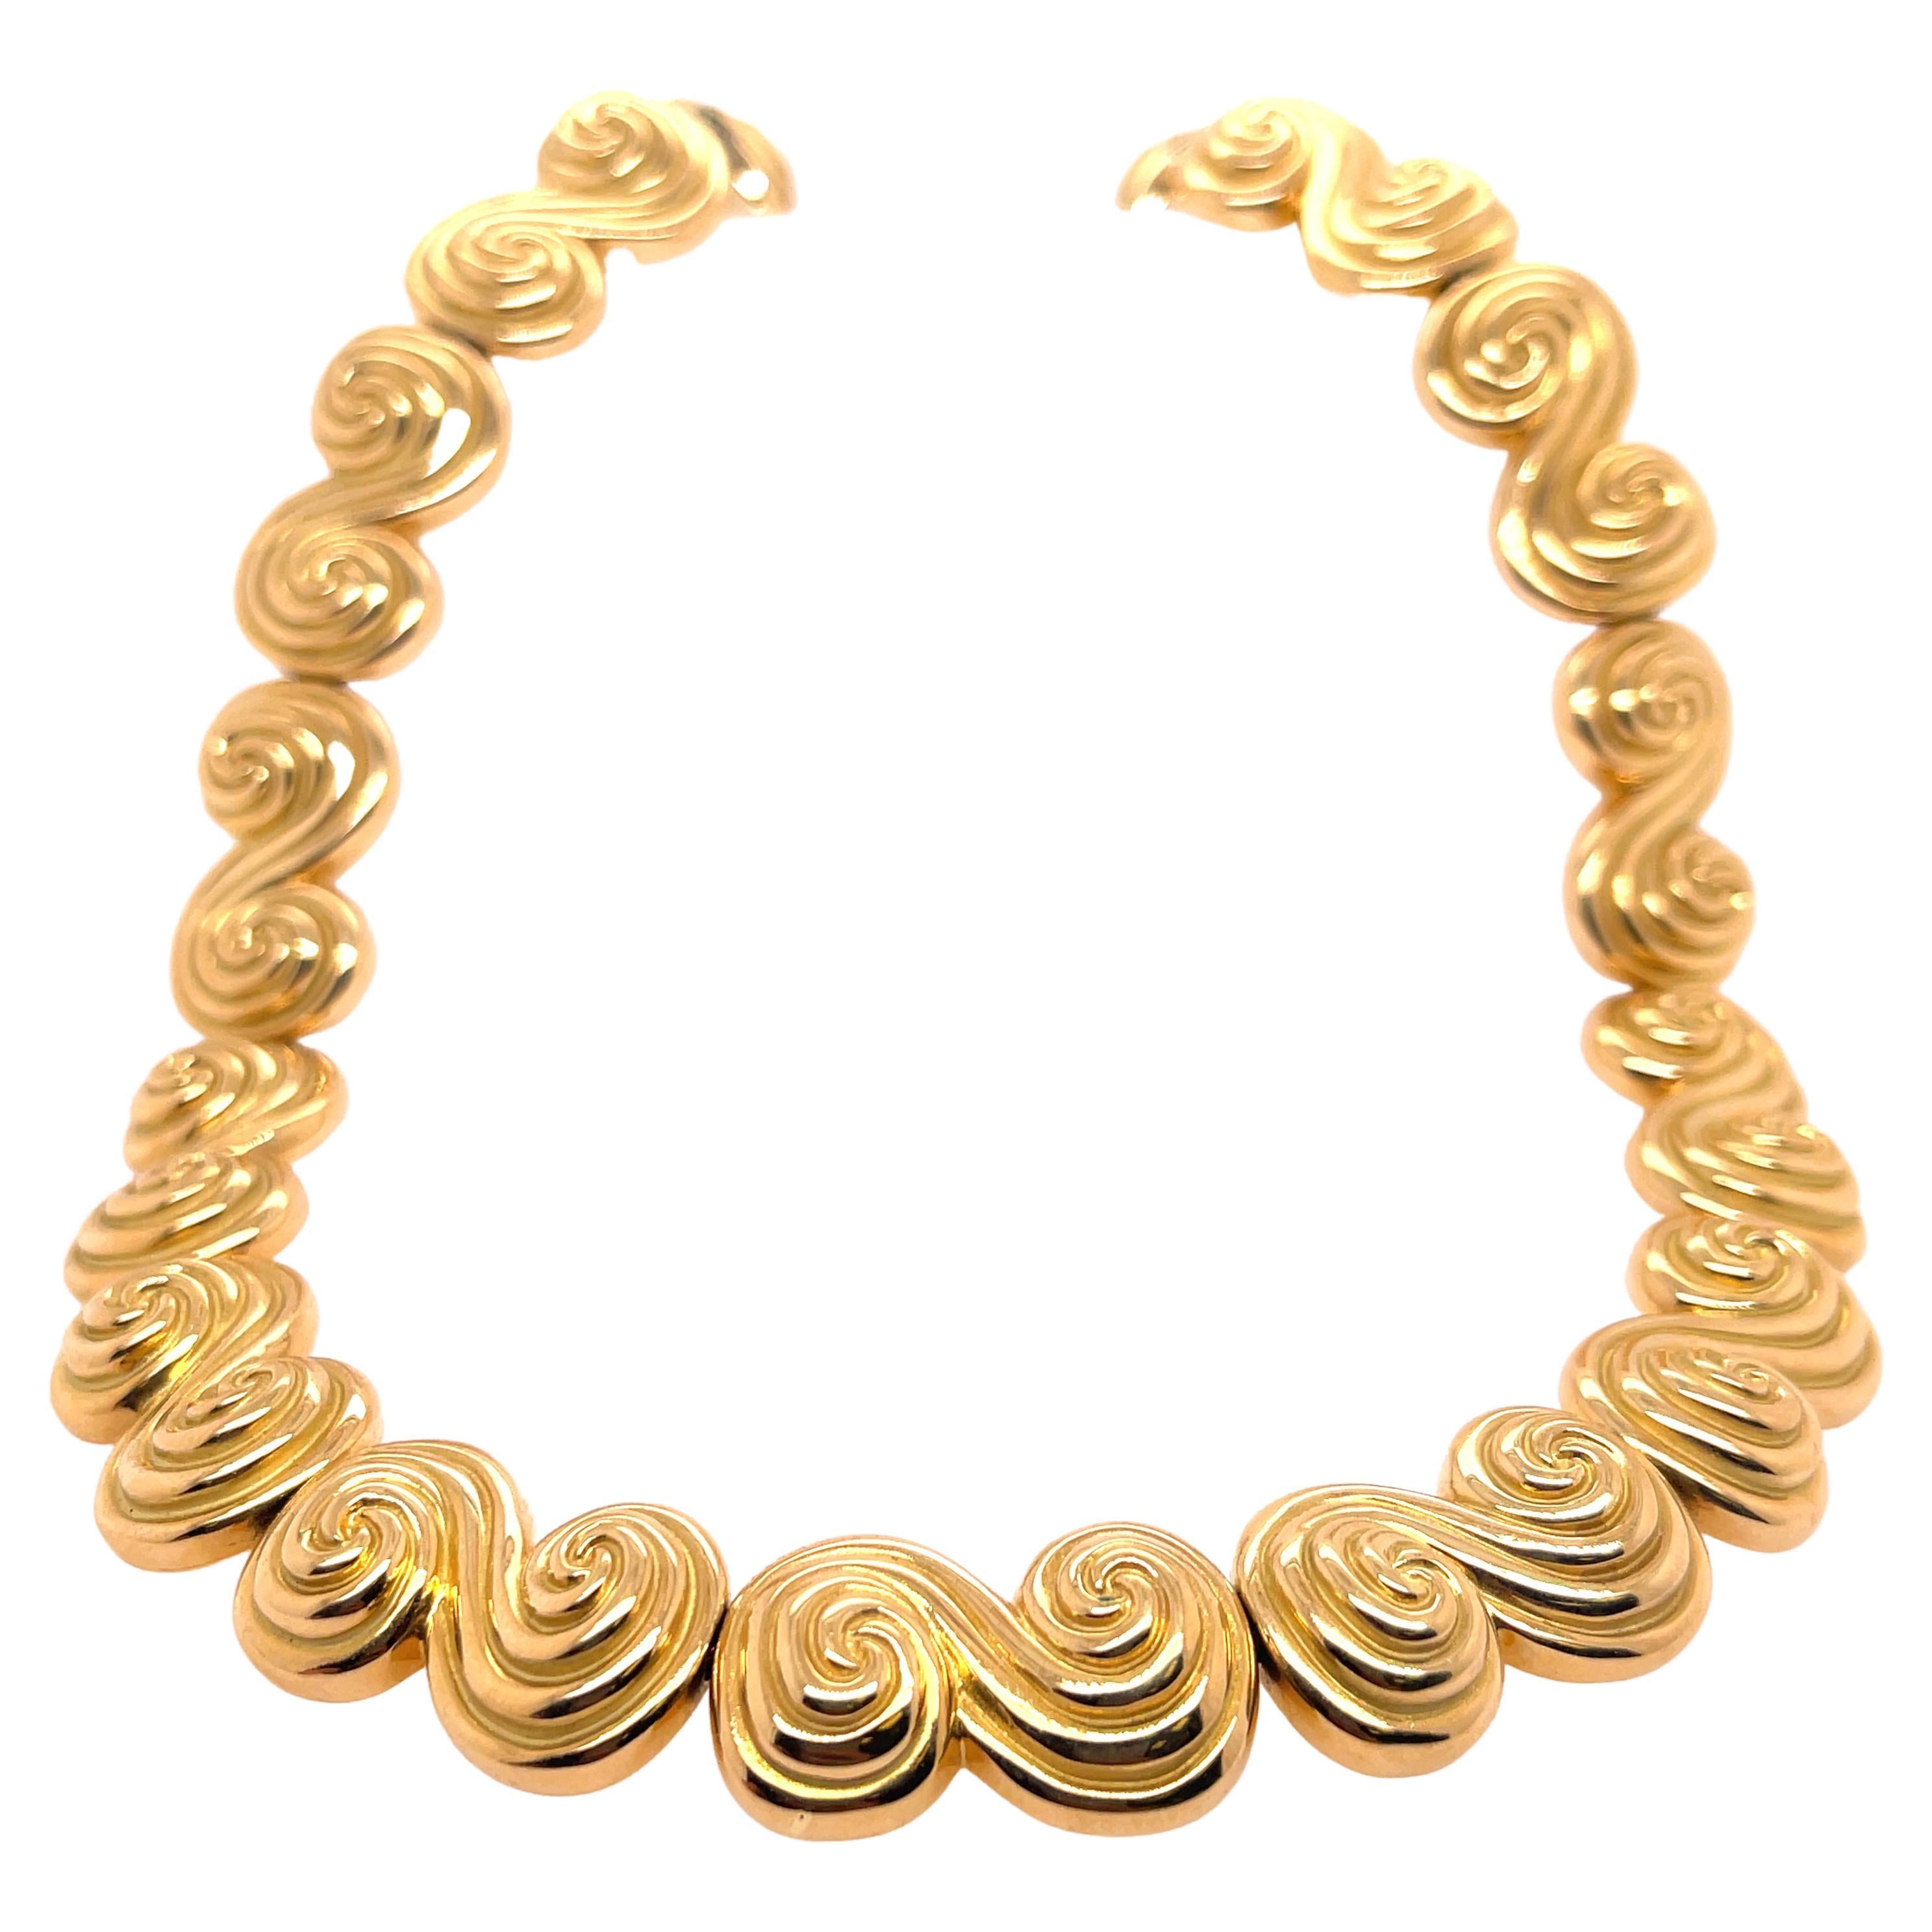 Tiffany & Co. Spiral Swirl Necklace Yellow Gold